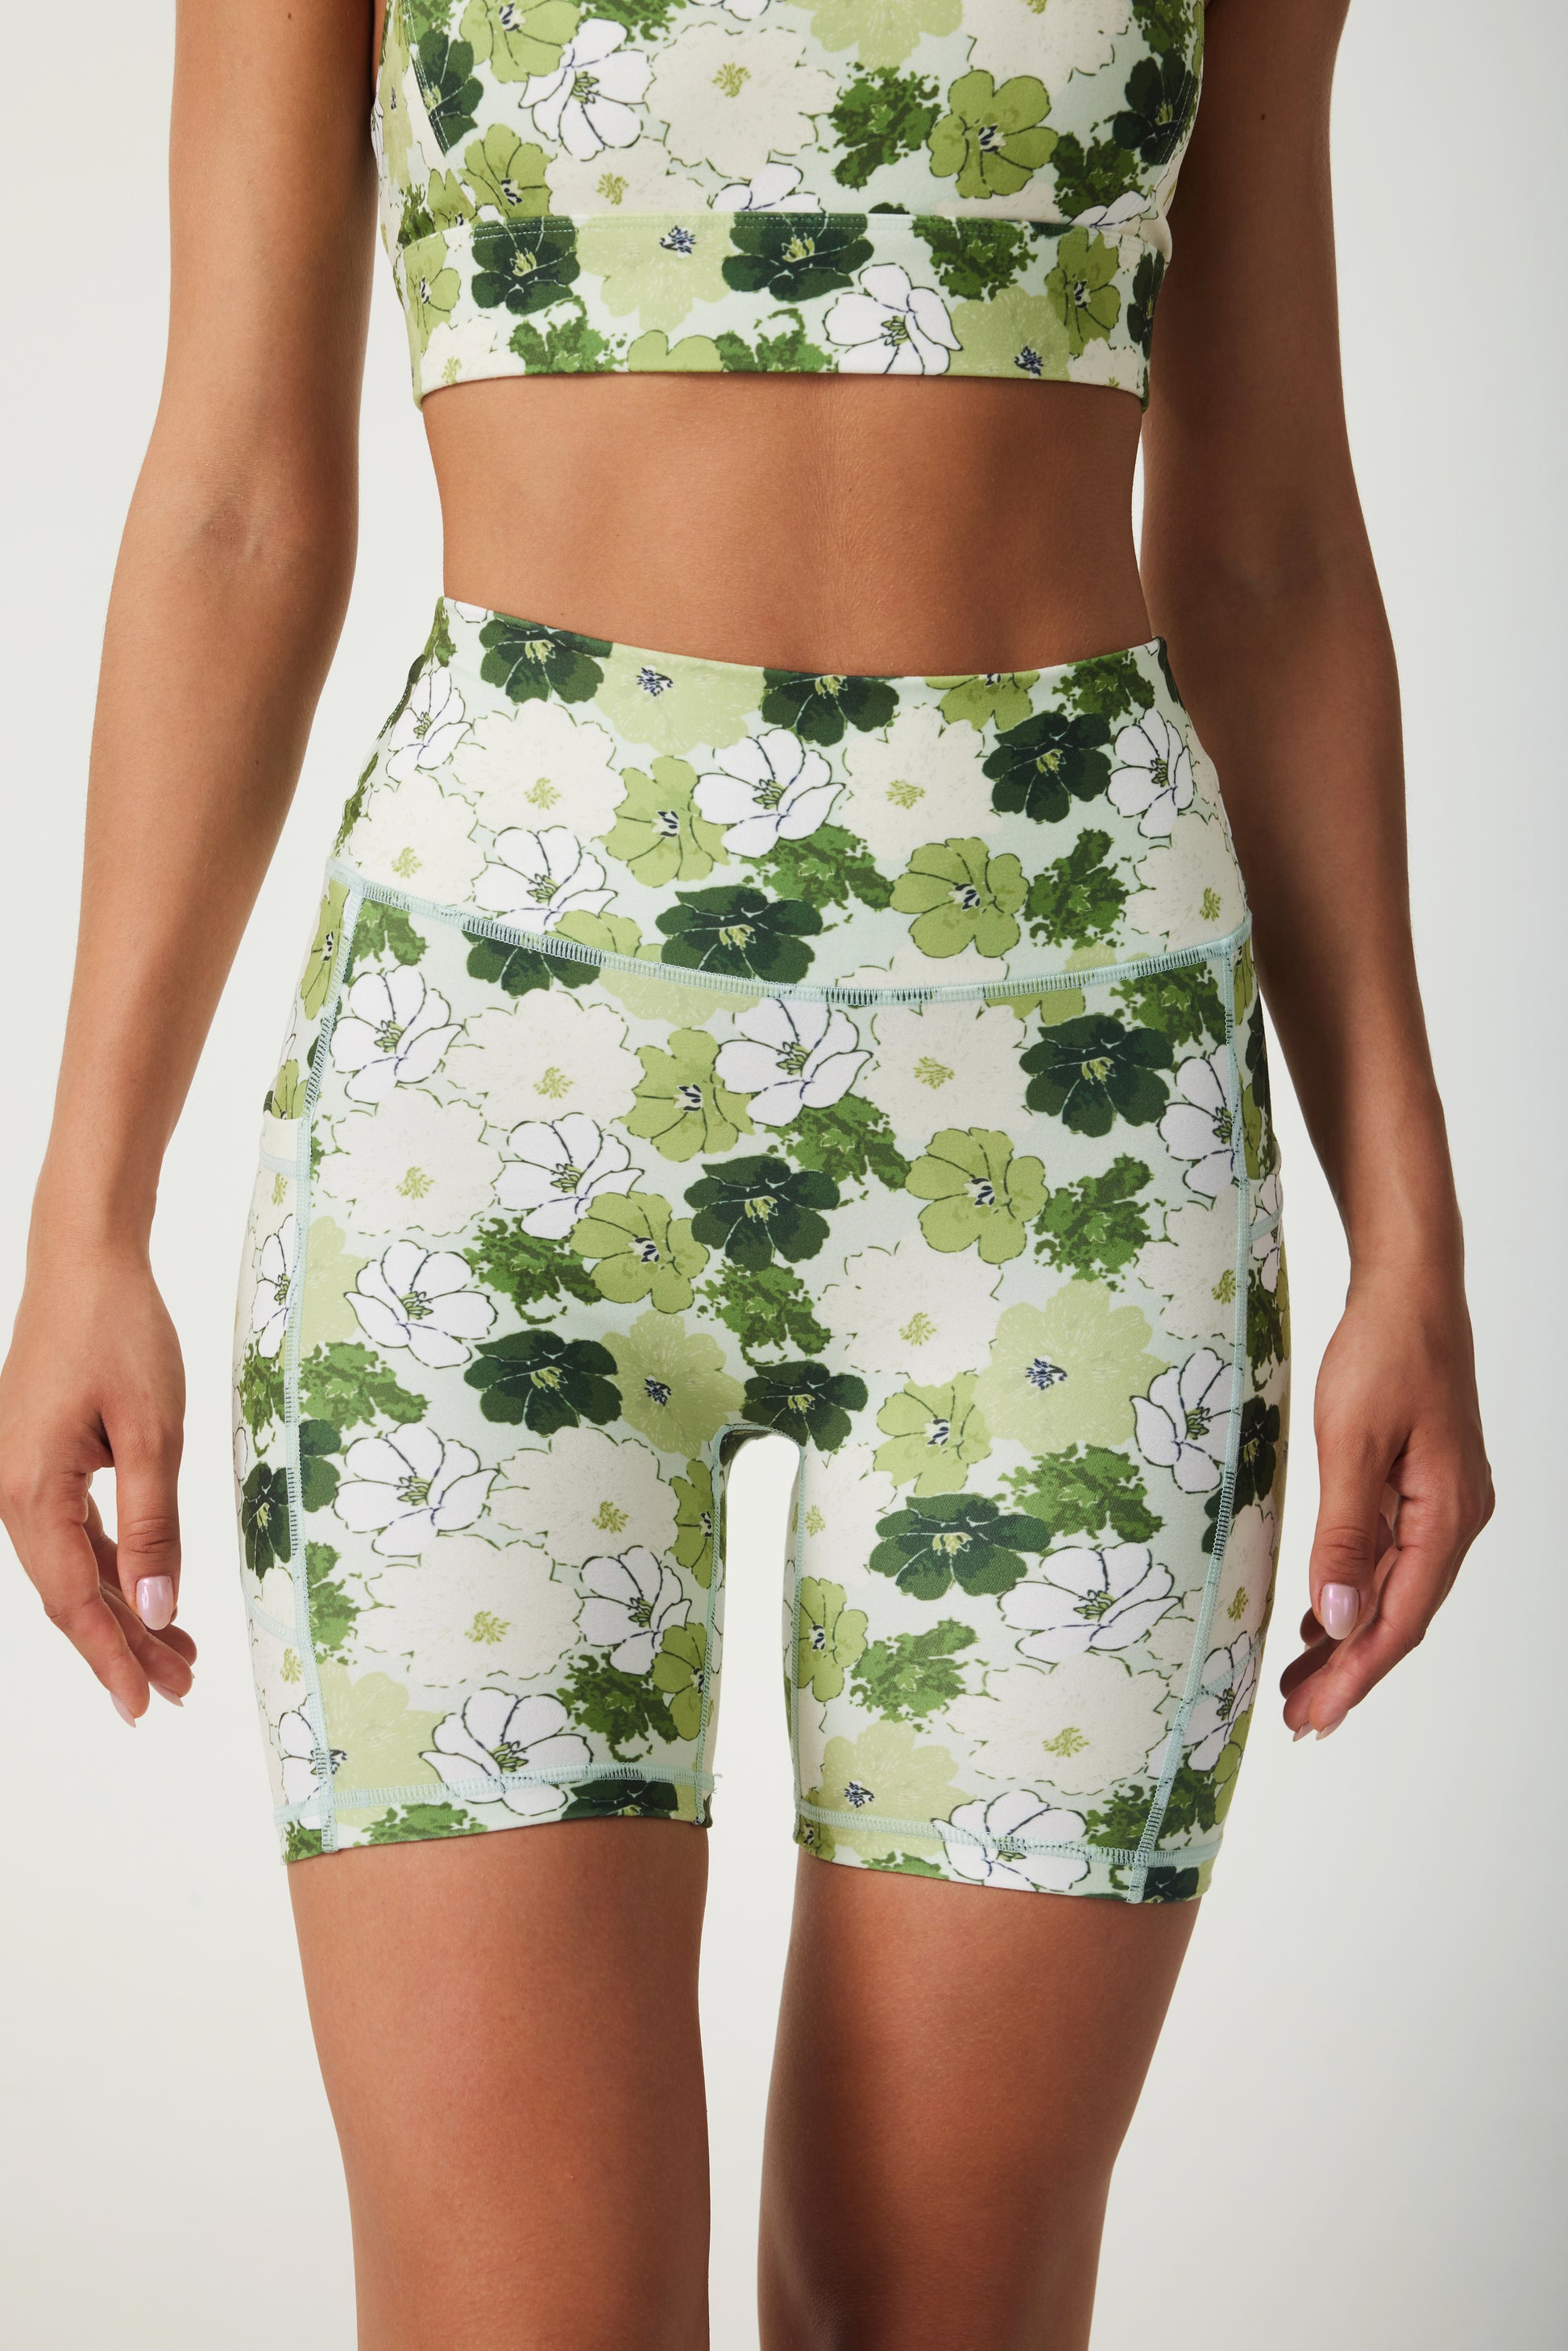 Renewal Green Floral High-waisted Shorts - SILVERWIND